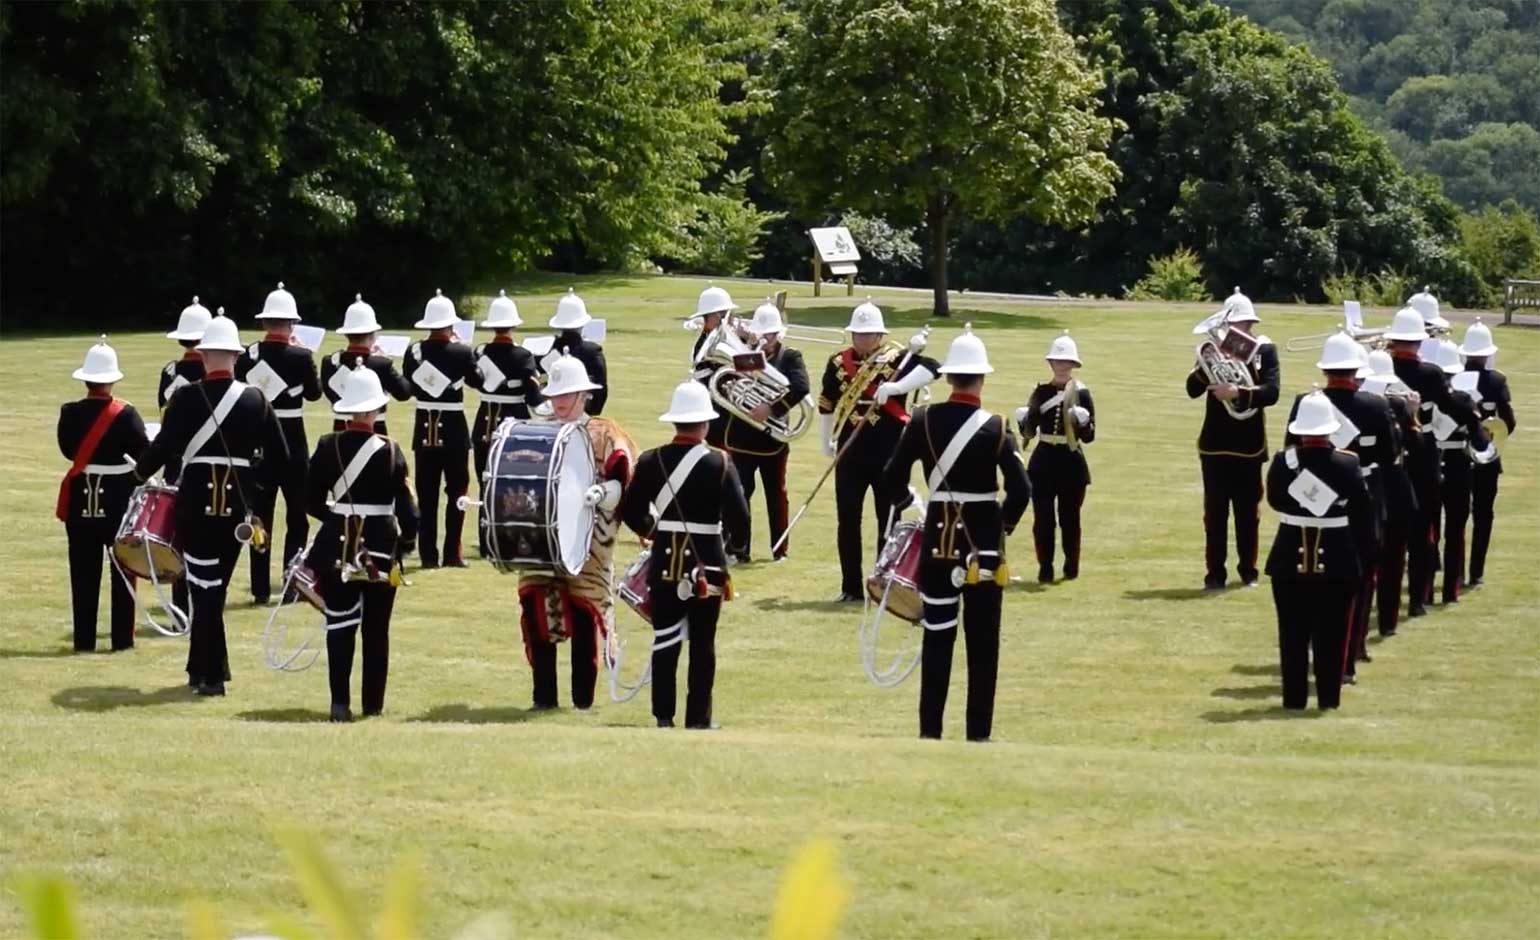 Royal Marines Band says special farewell to Dorothy House patient